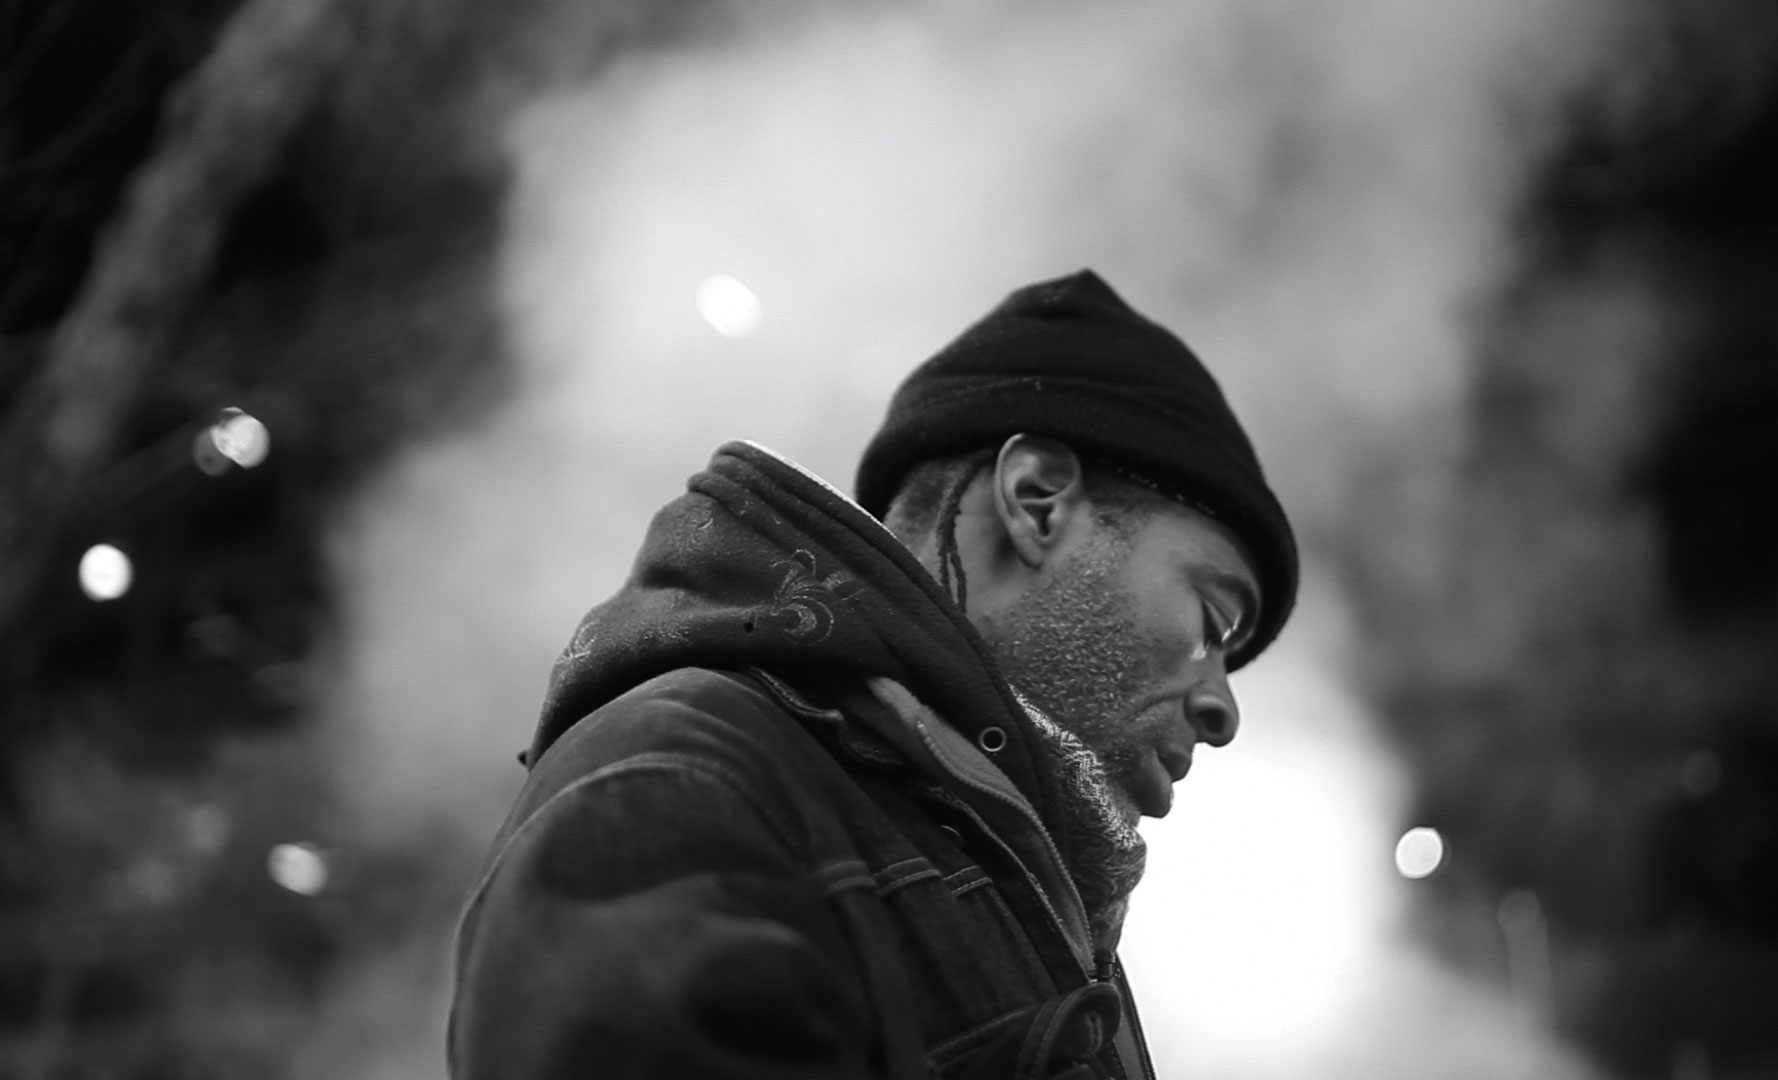 A smoky, black and white perspective shot of a man in a beanie